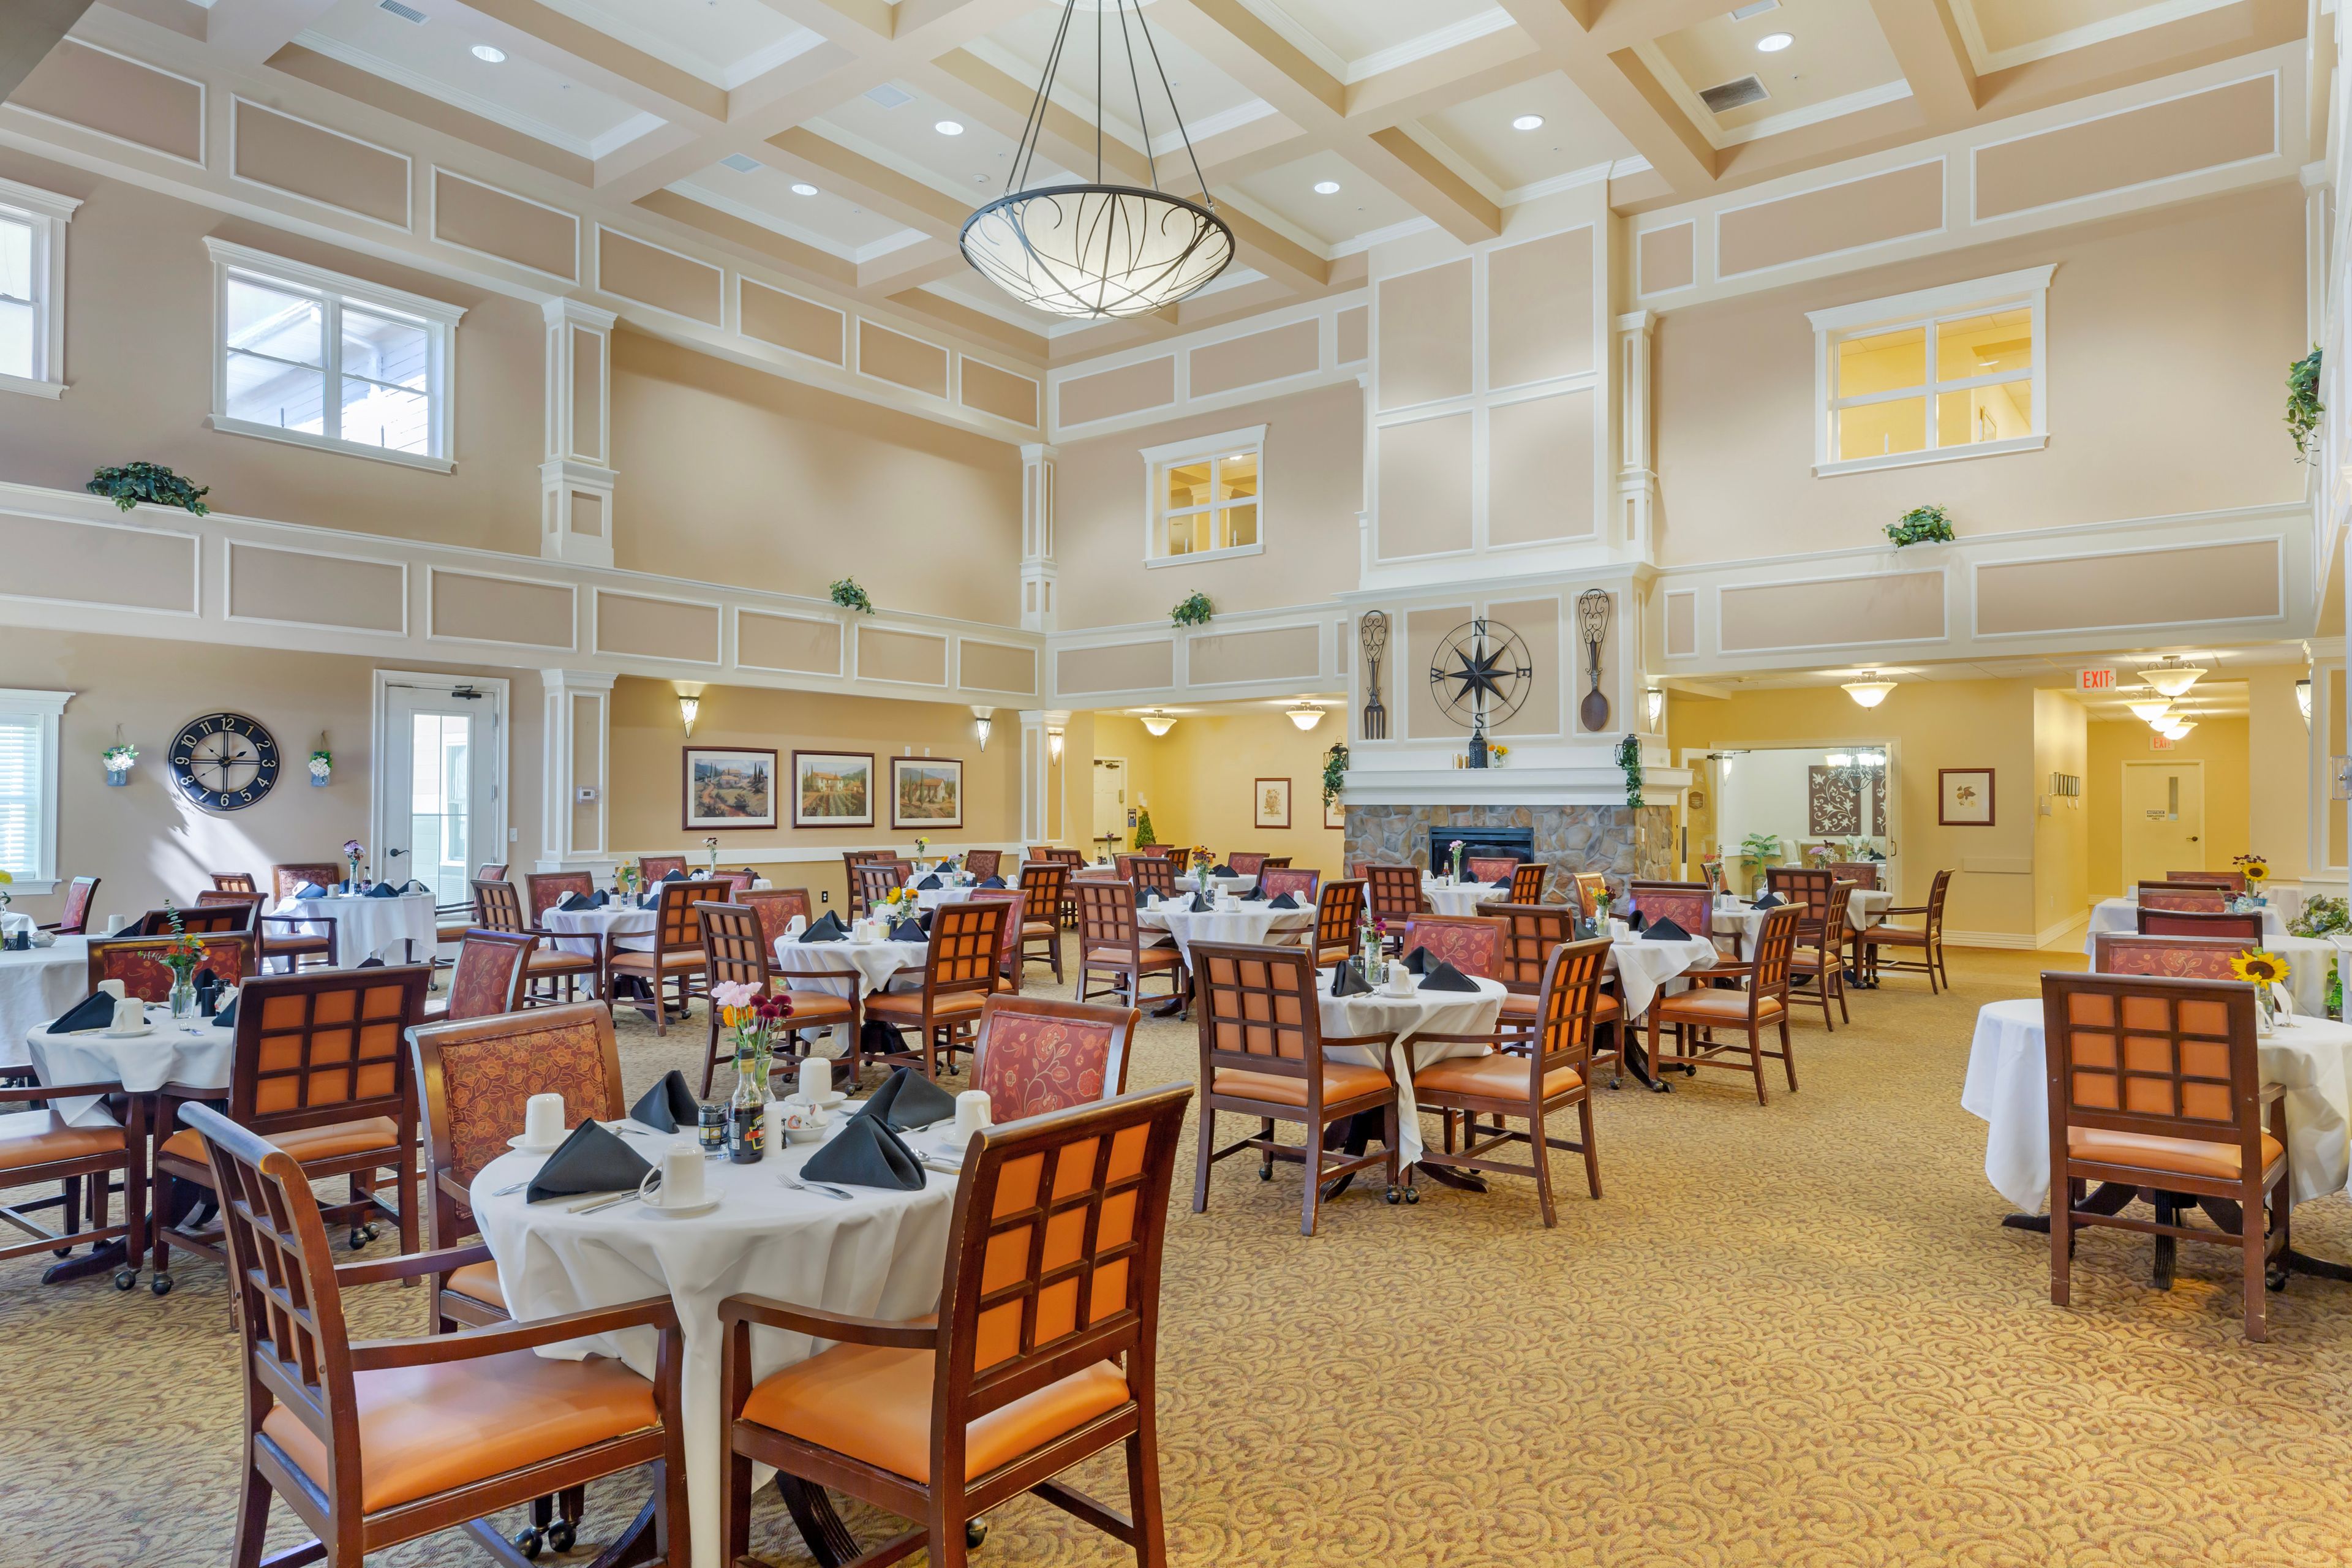 Interior view of Brookdale Centre of New England featuring dining area, art, and modern decor.